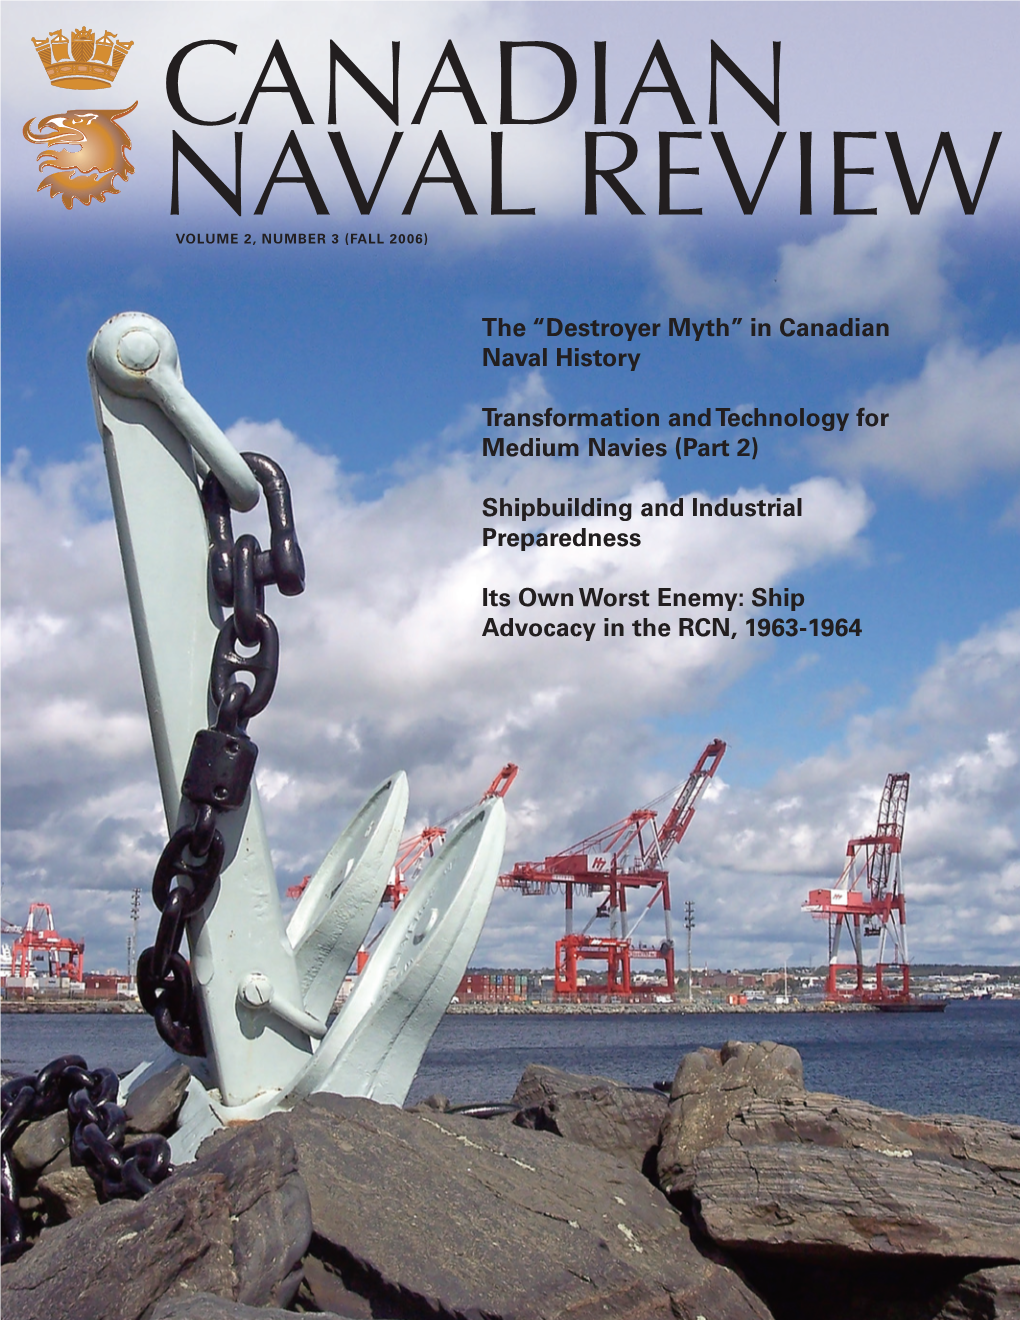 Destroyer Myth” in Canadian Naval History